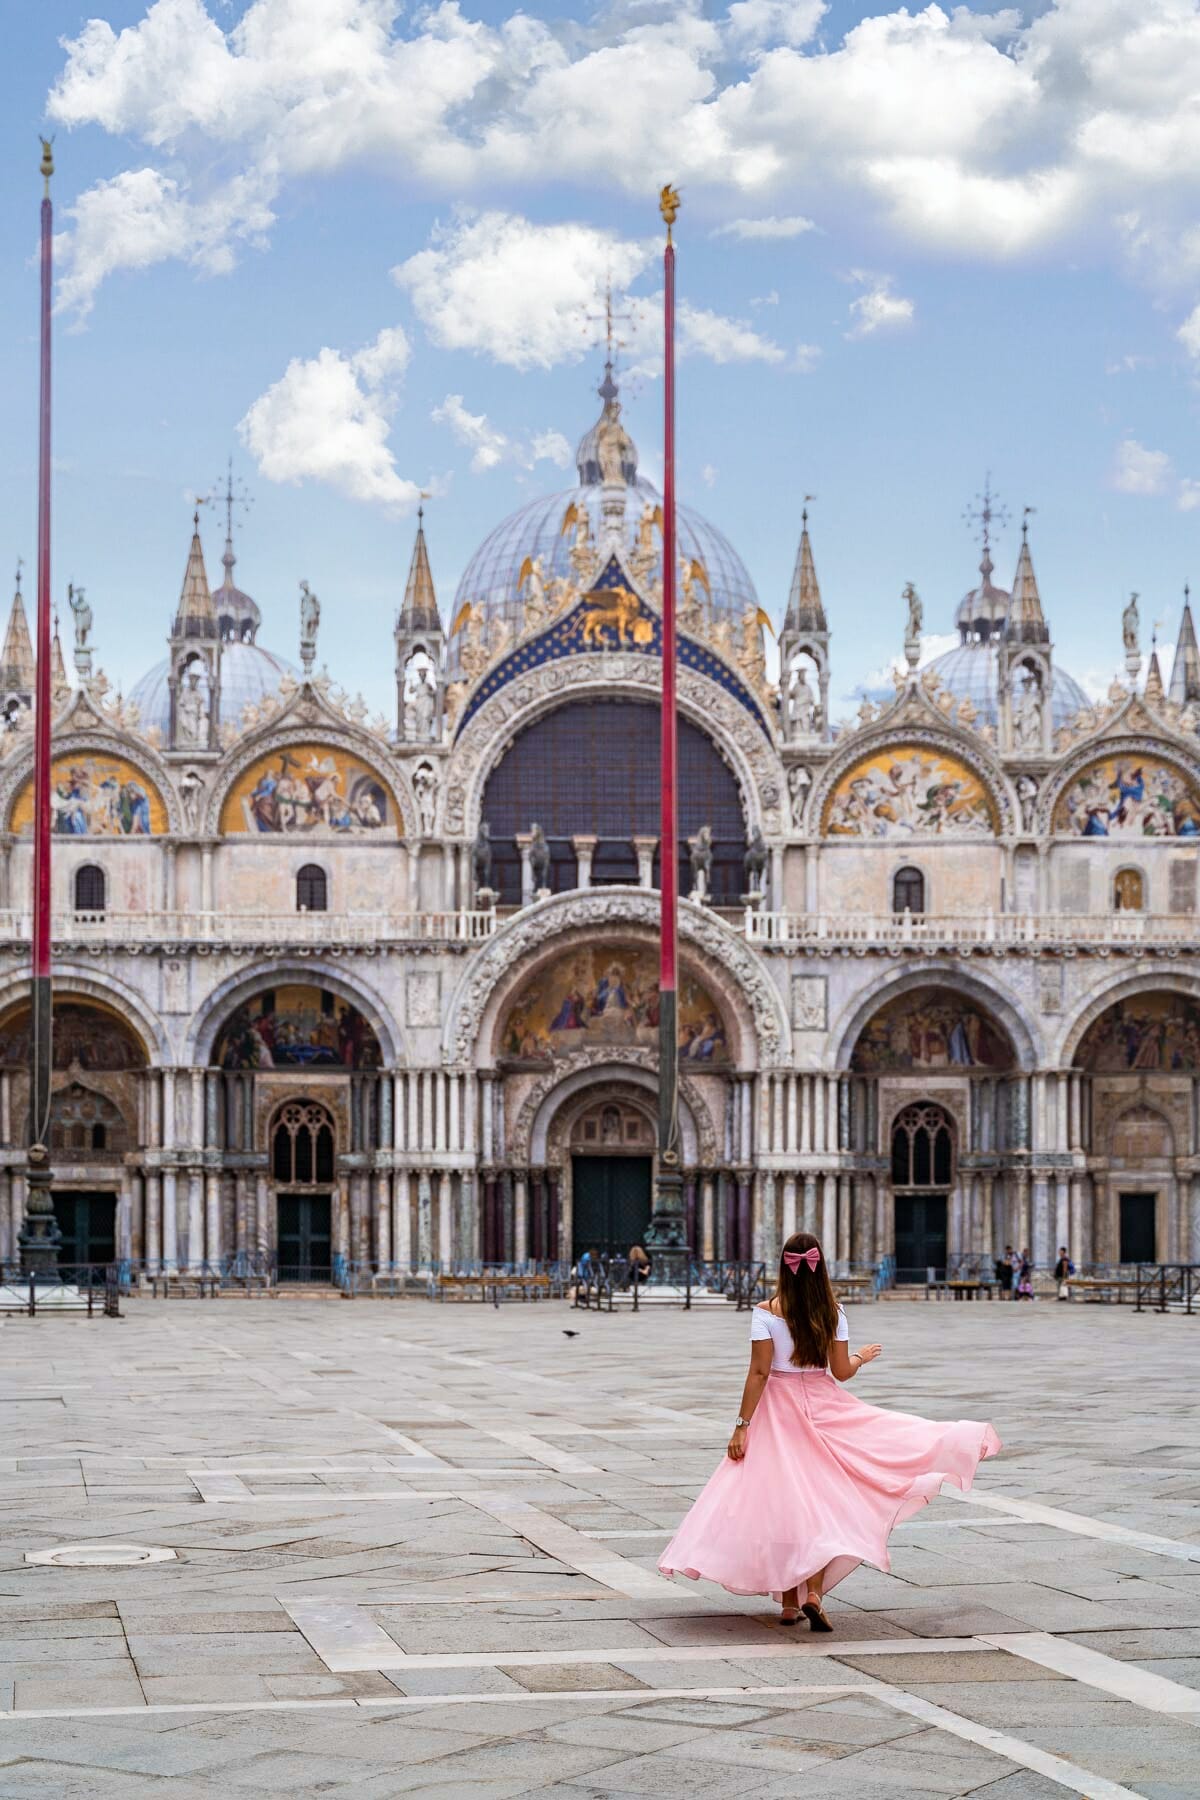 Girl in a pink skirt twirling in front of St. Mark's Basilica in Venice, Italy